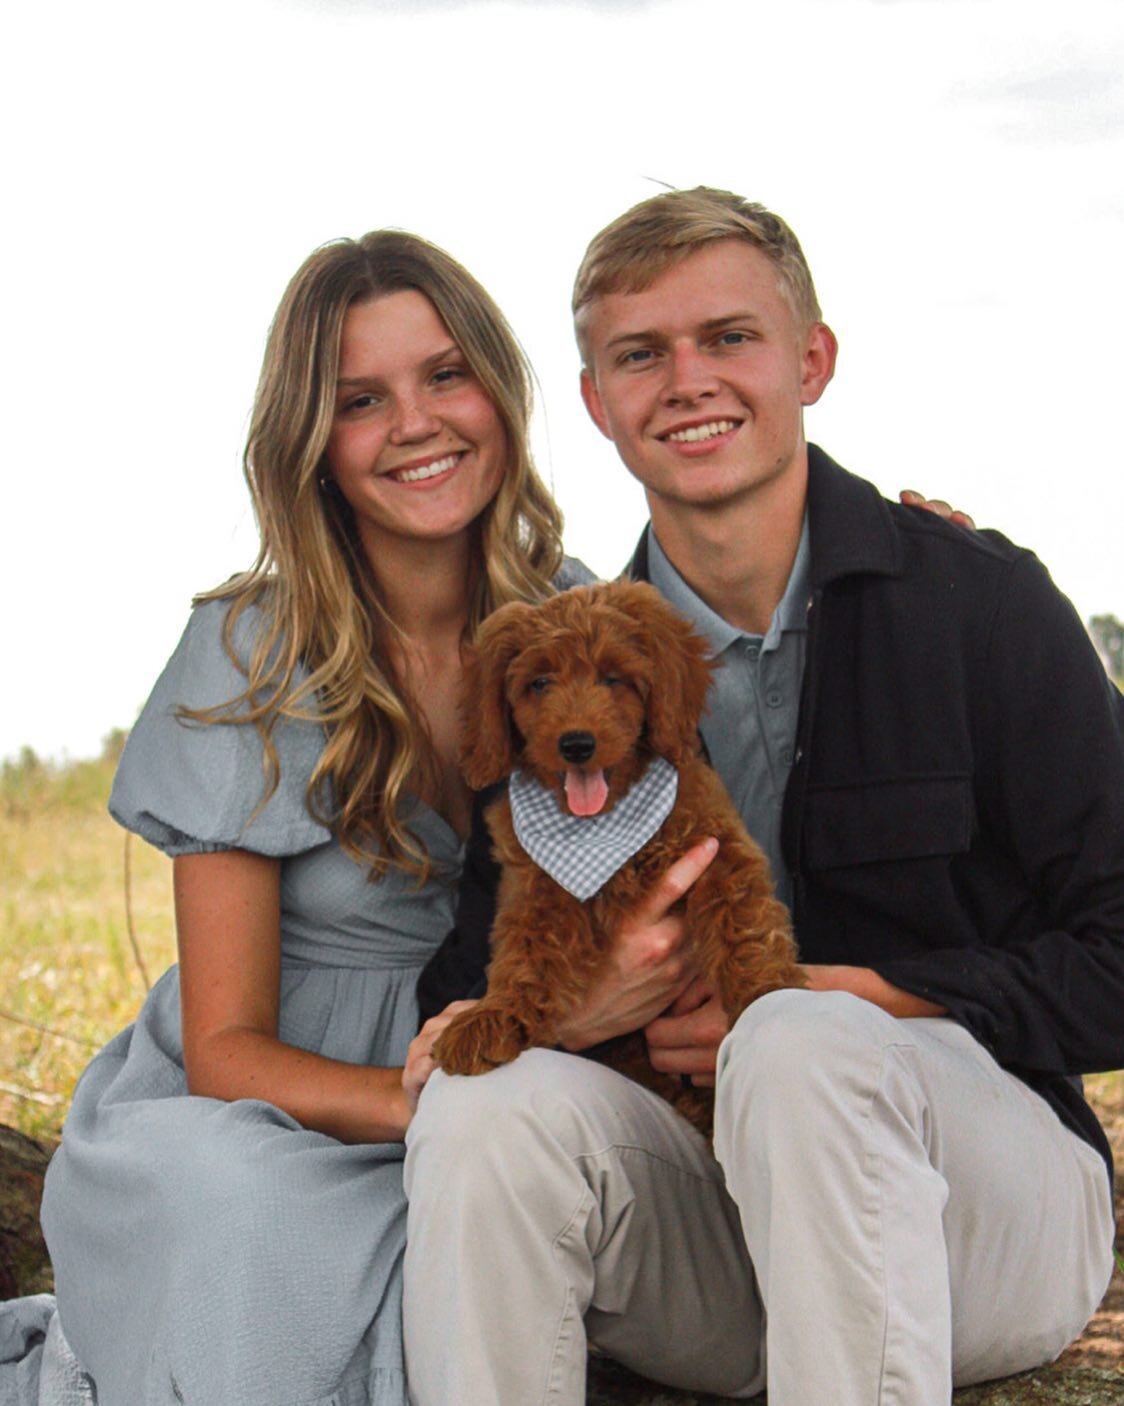 Popping in to show you or sweet little pup! Not your usual post from Of the Valley but I thought it&rsquo;d be a good opportunity to share more about my little family. 

I married my best friend a little over a year and a half ago and it has been the